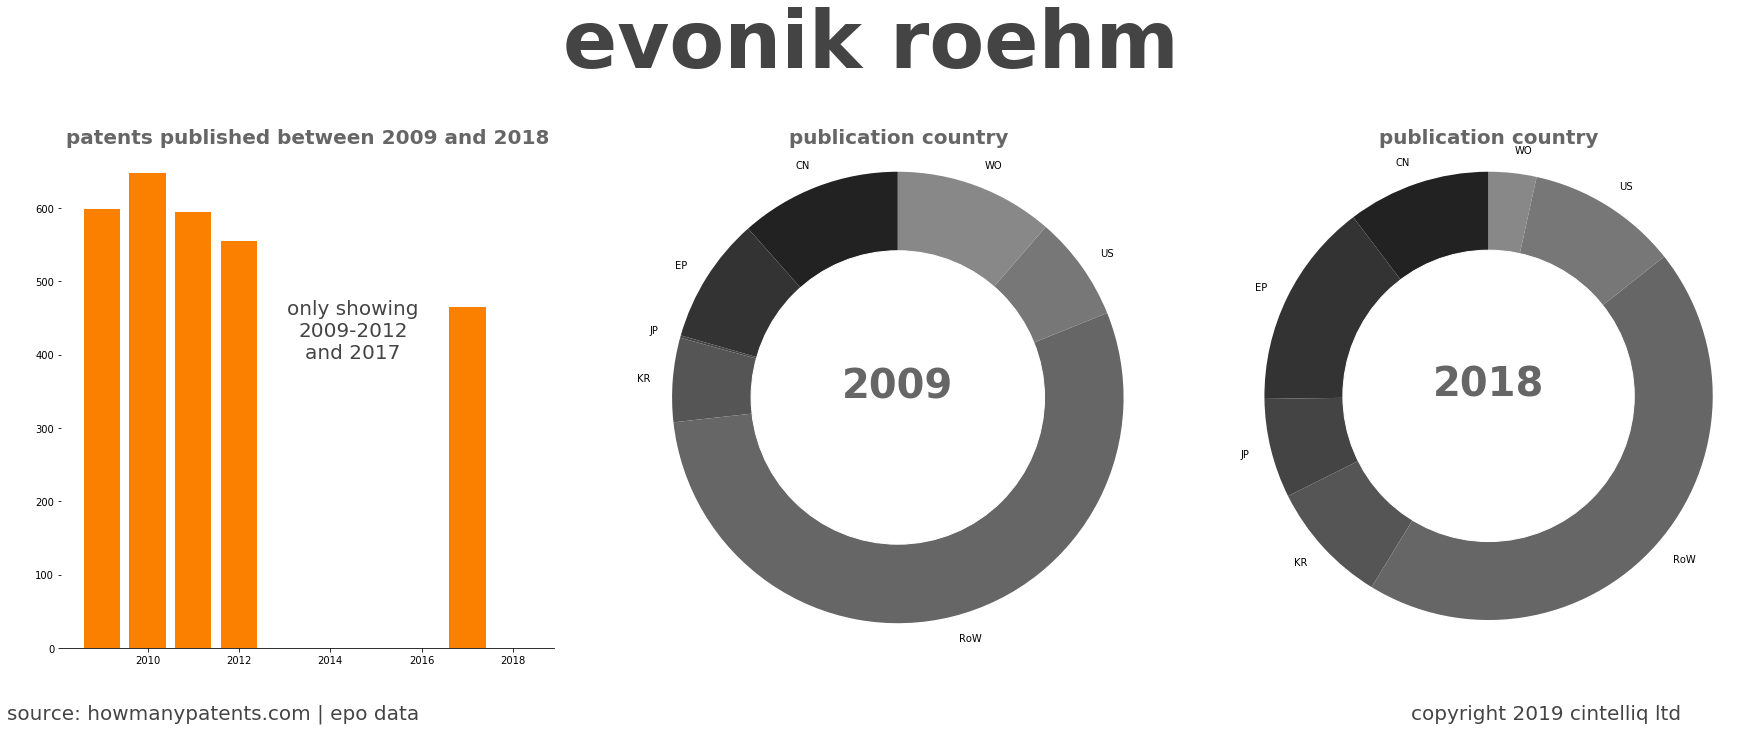 summary of patents for Evonik Roehm